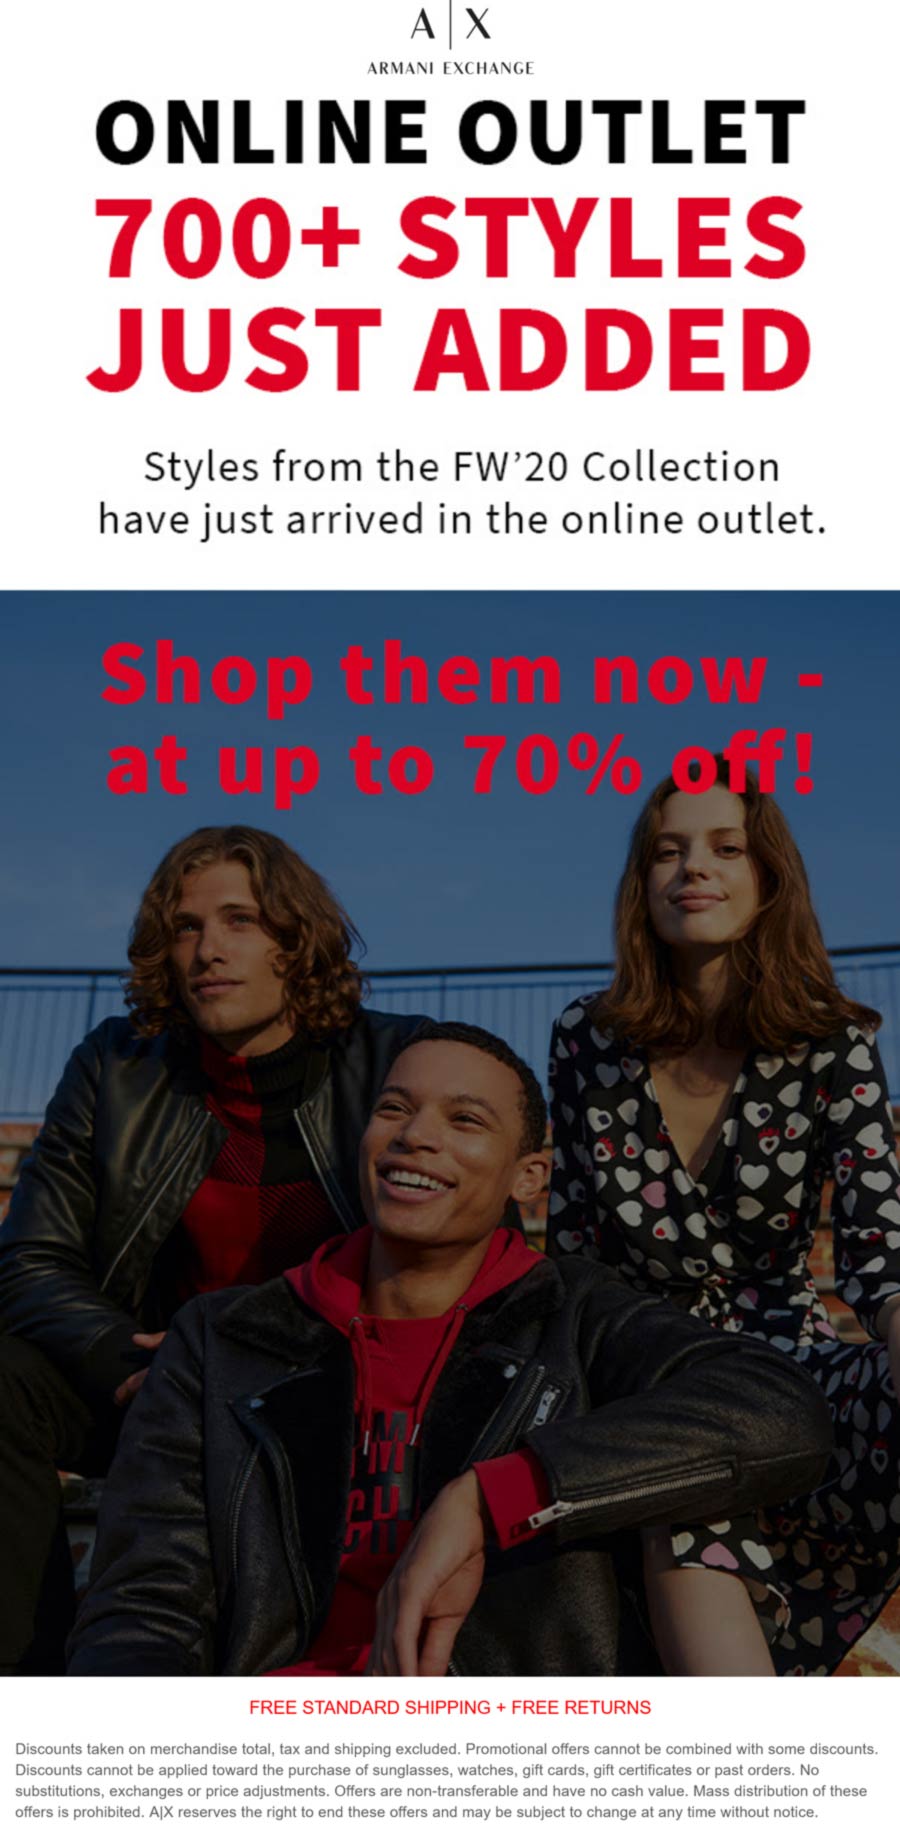 Armani Exchange stores Coupon  Outlet styles are 70% off at Armani Exchange #armaniexchange 